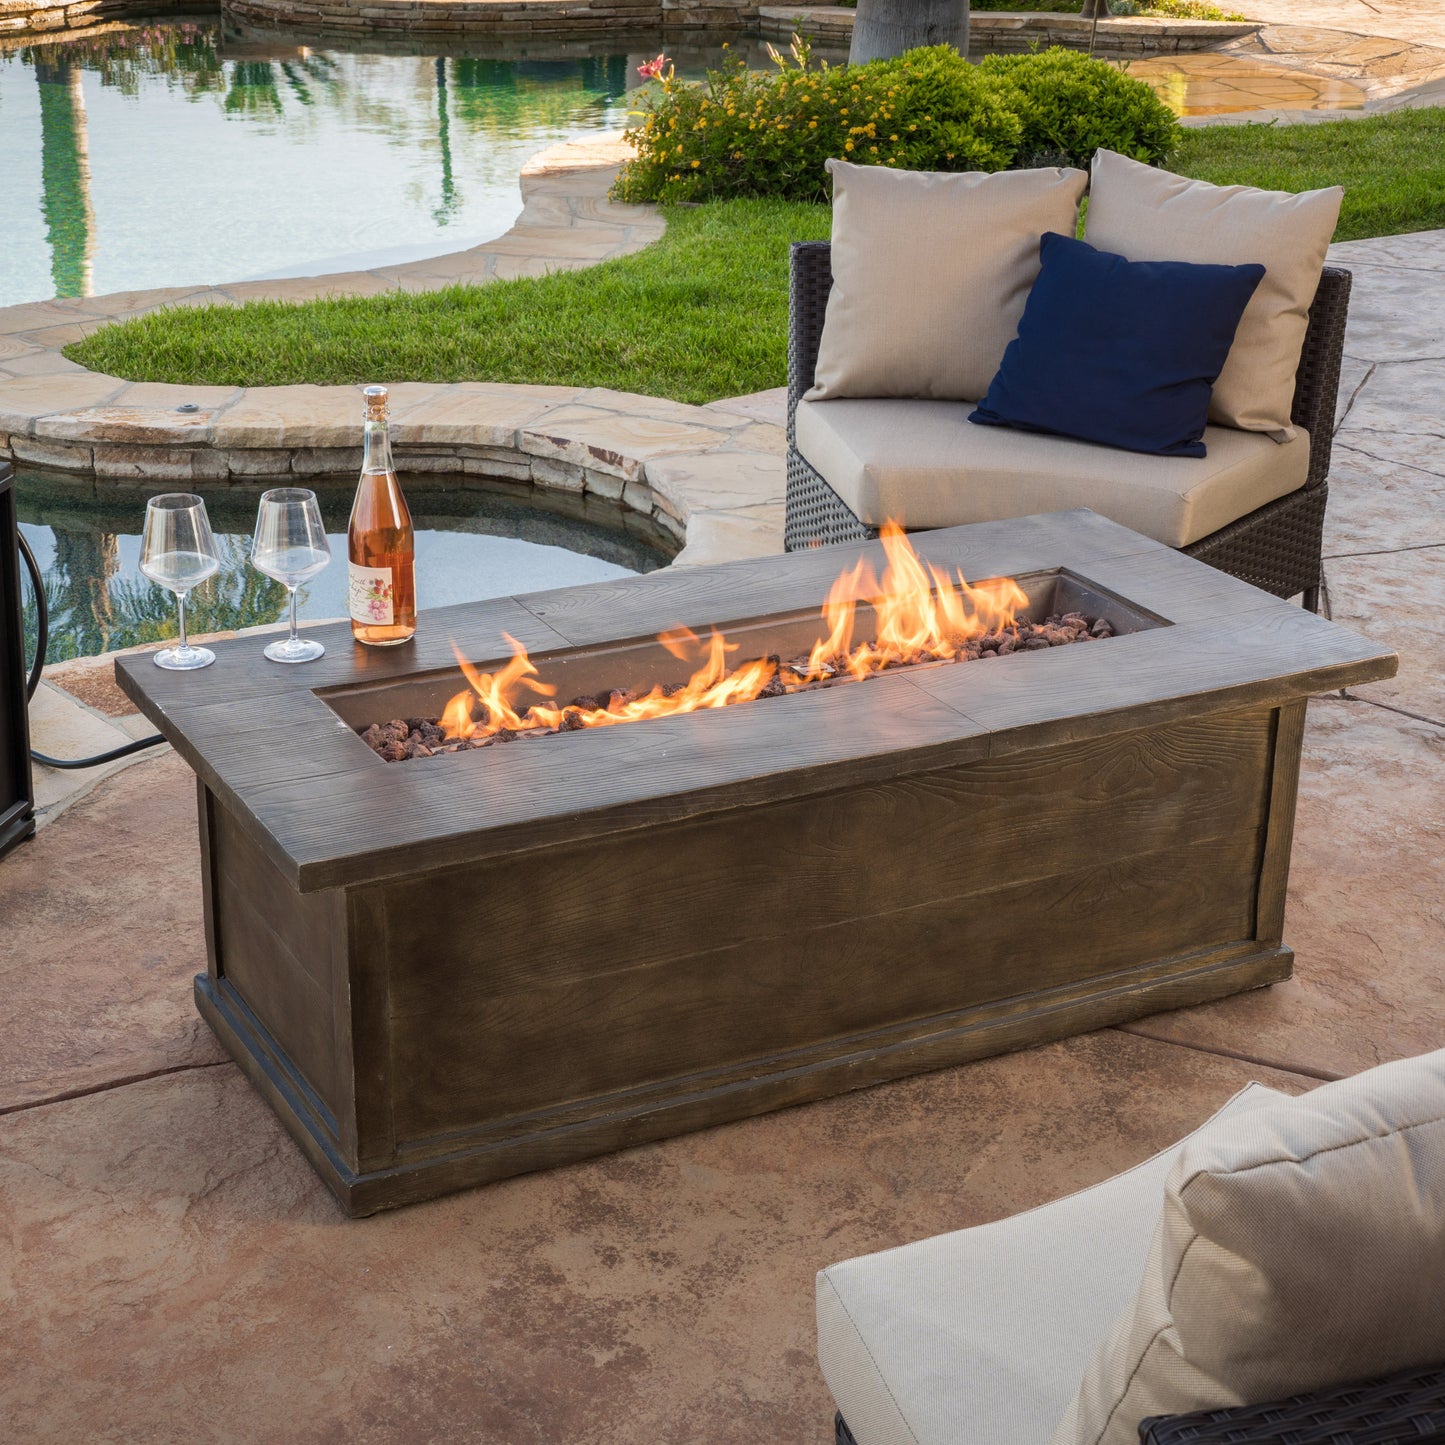 Pablo Outdoor 56-inch Rectangular Propane Fire Table